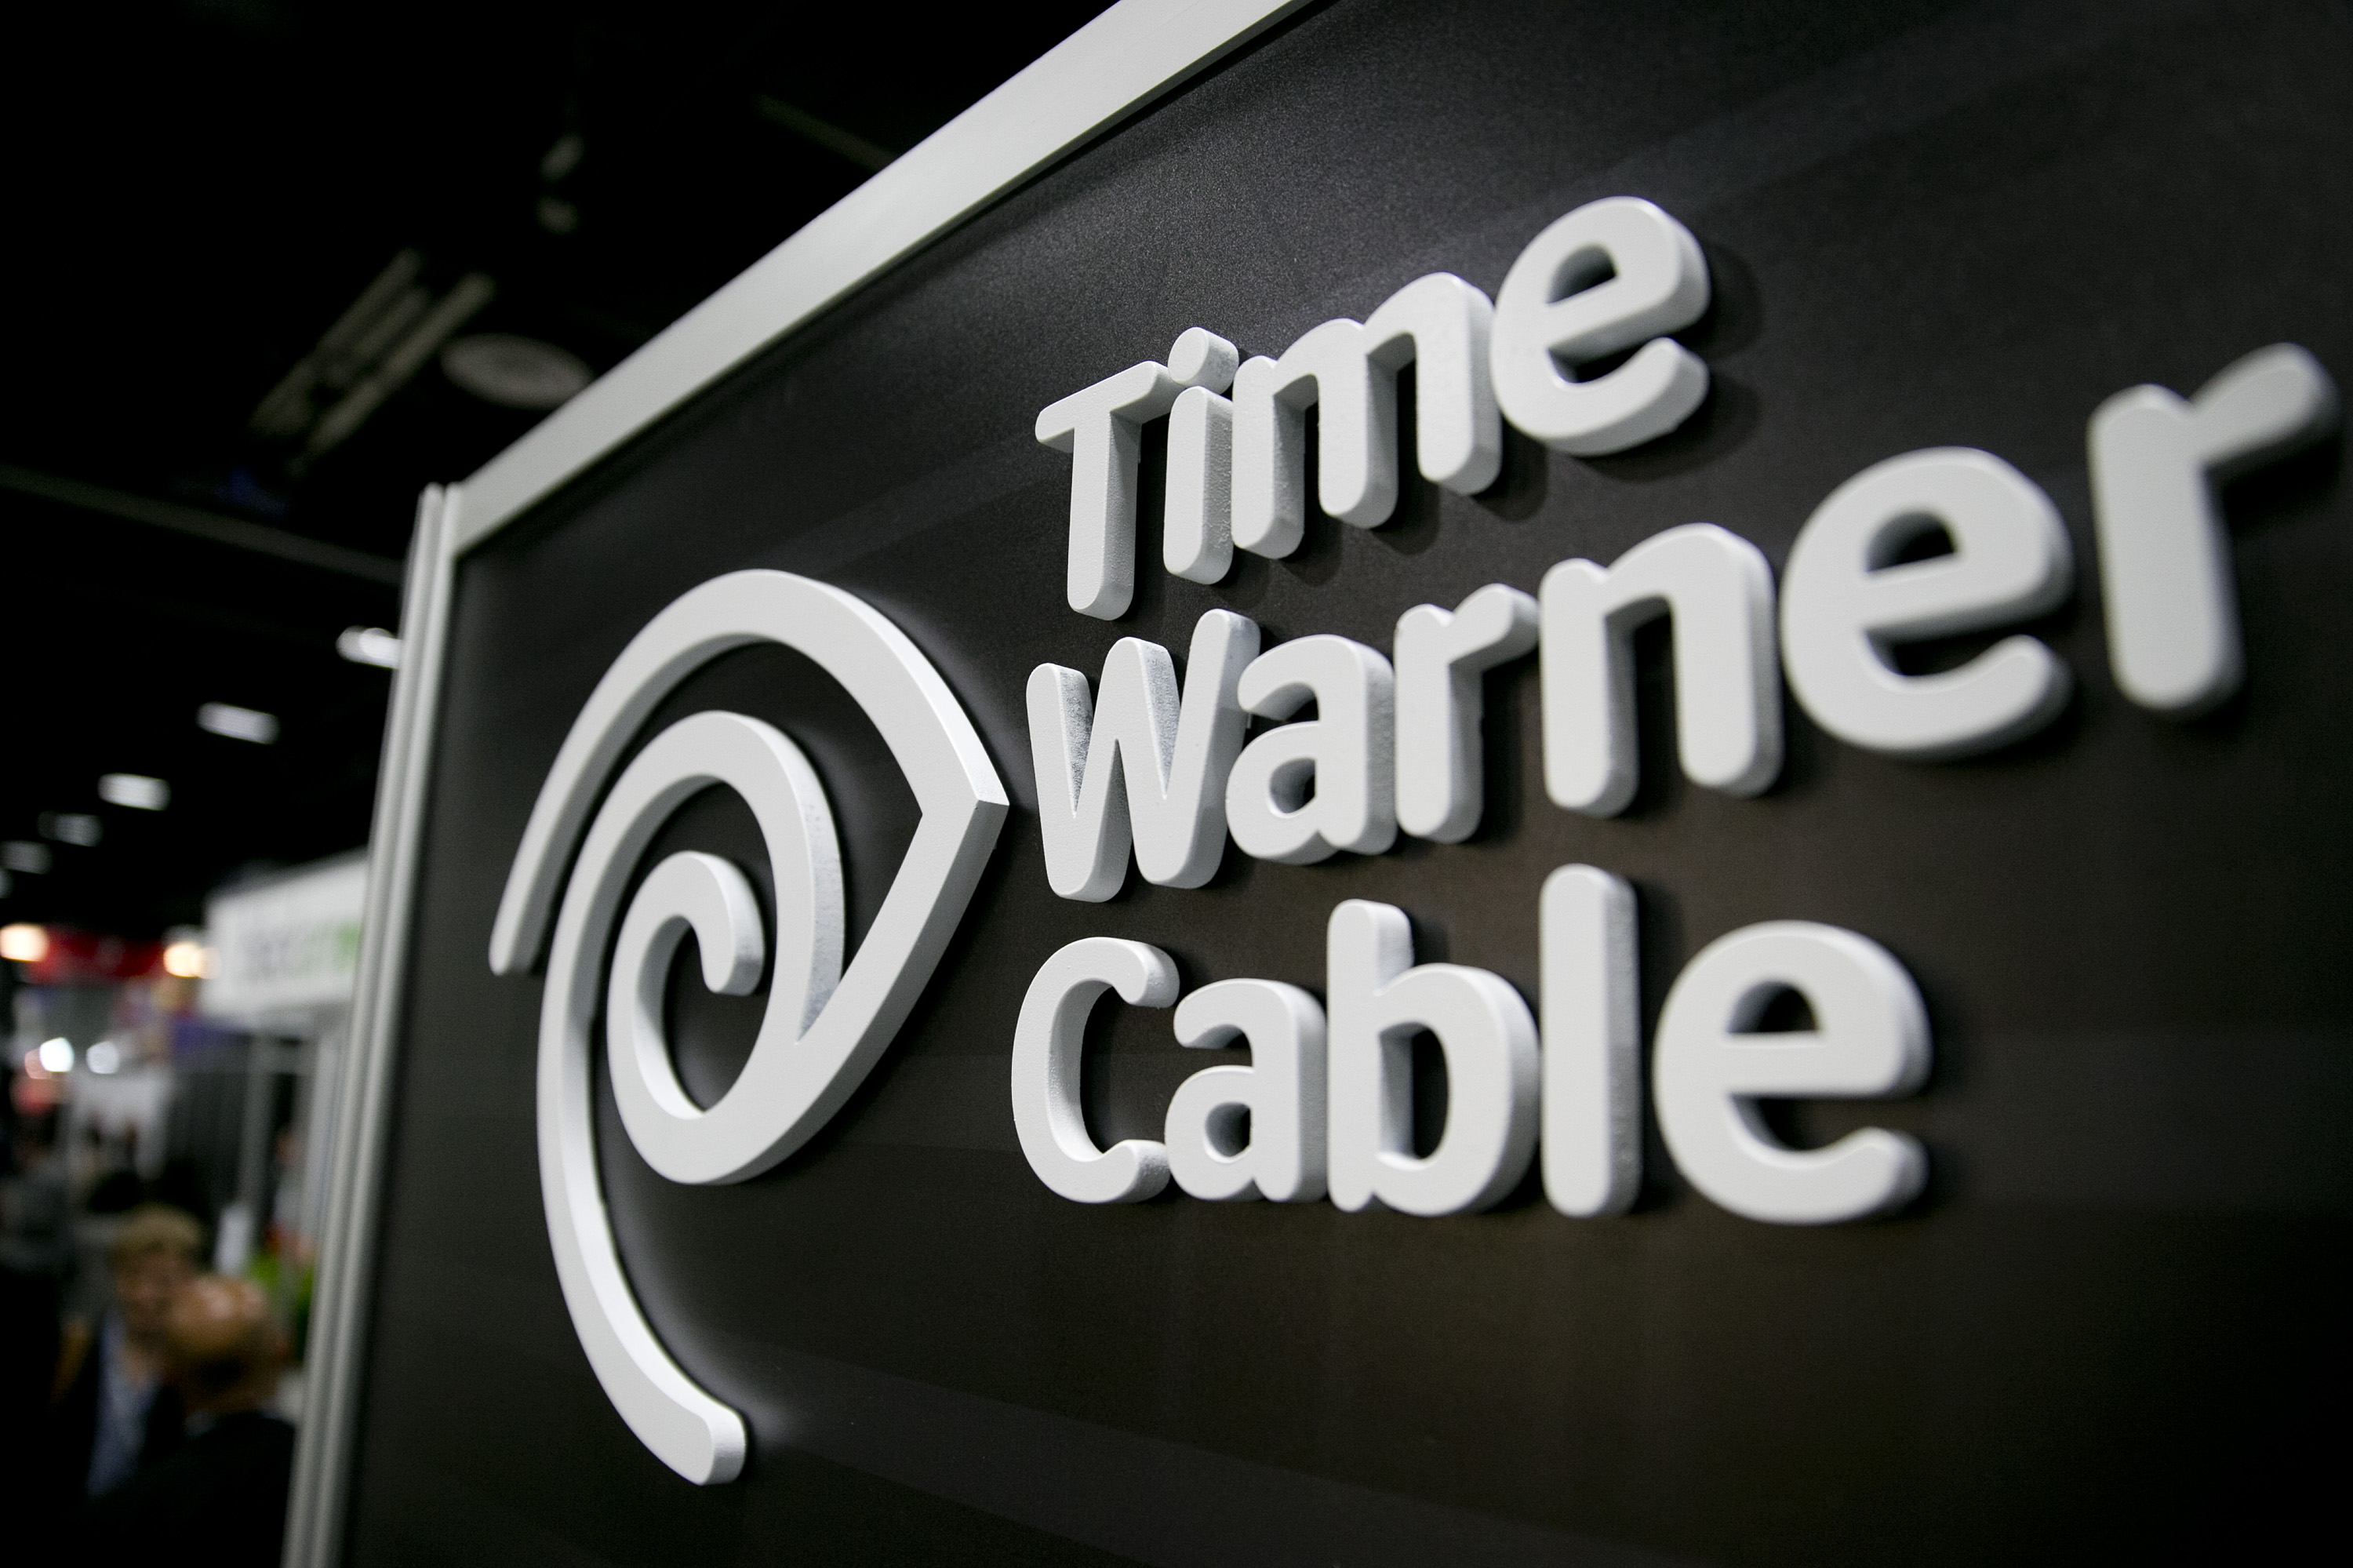 The Time Warner Cable Inc. logo is seen on the exhibit floor during the National Cable and Telecommunications Association (NCTA) Cable Show in Washington, D.C., U.S., on Tuesday, June 11, 2013. (Bloomberg—Bloomberg via Getty Images)